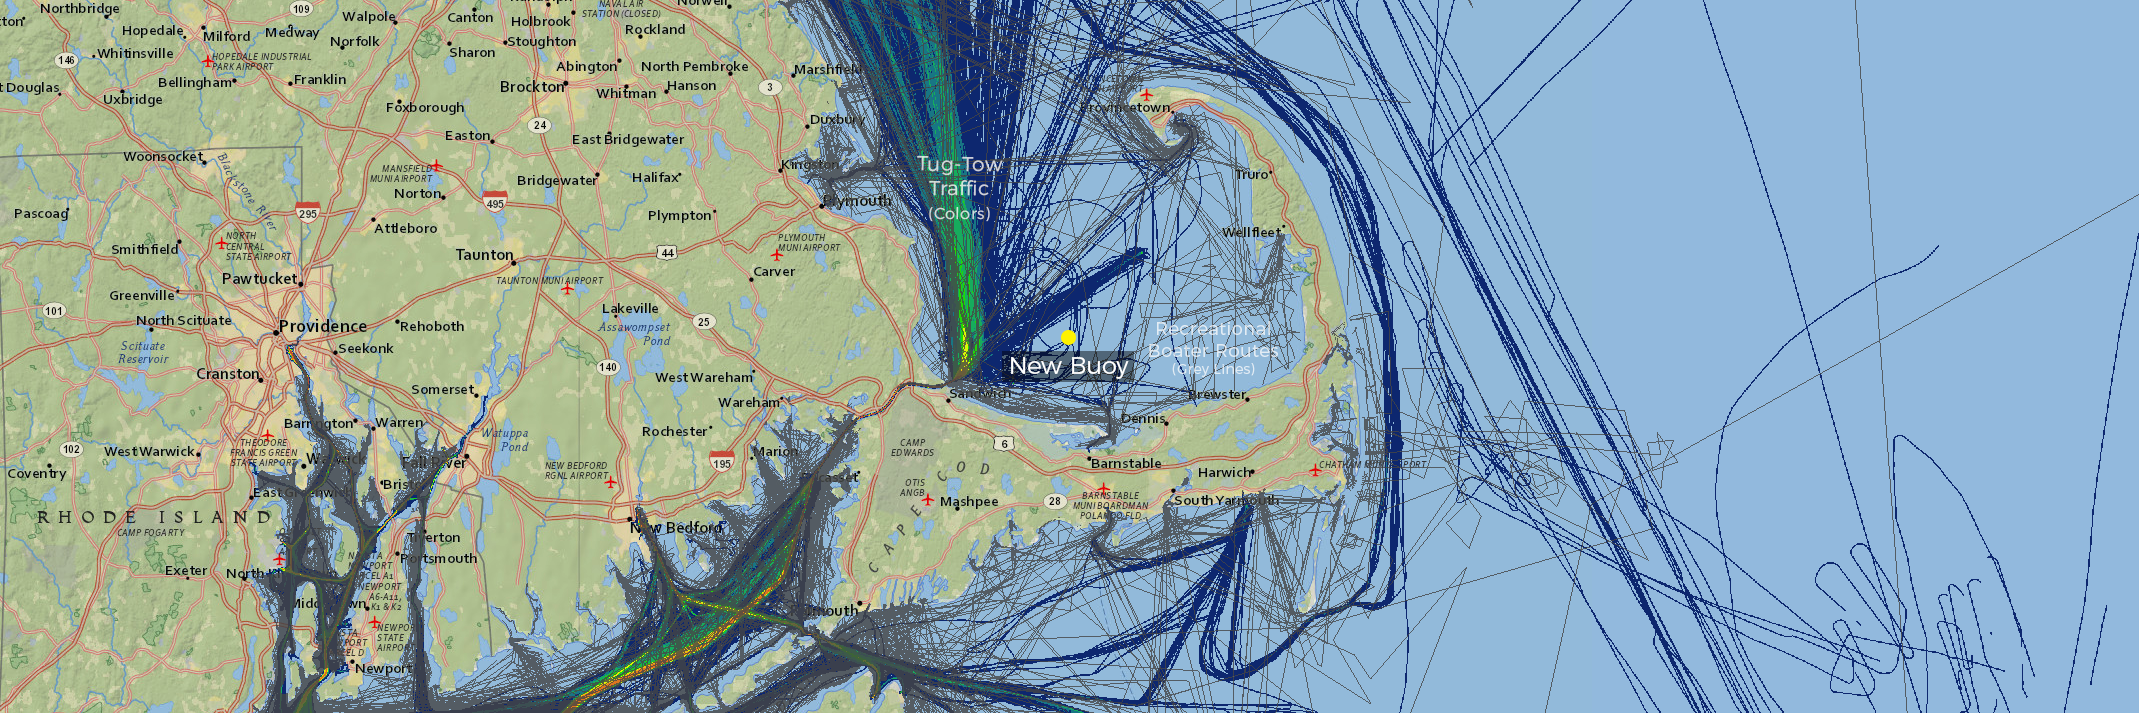 Screenshot of Northeast Ocean Data interactive map showing new buoy location with tug-tow traffic (colors) and recreational boater routes (grey lines).